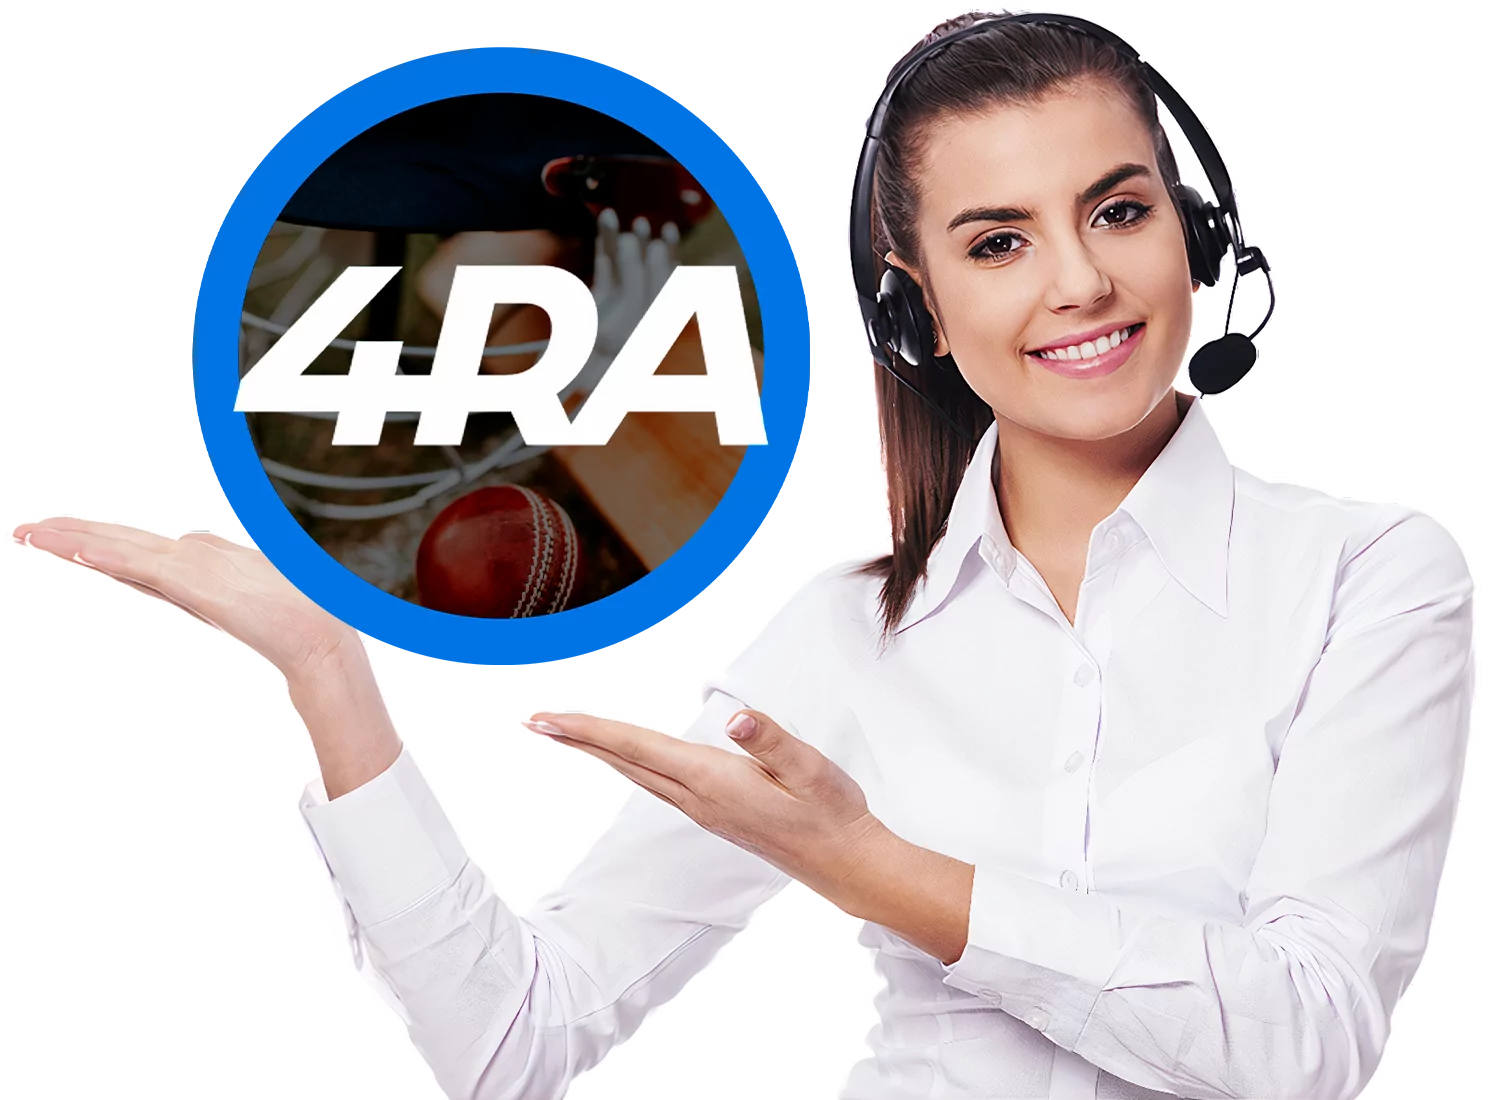 You contact the 4rabet support team whenever you have a betting-connected problem.